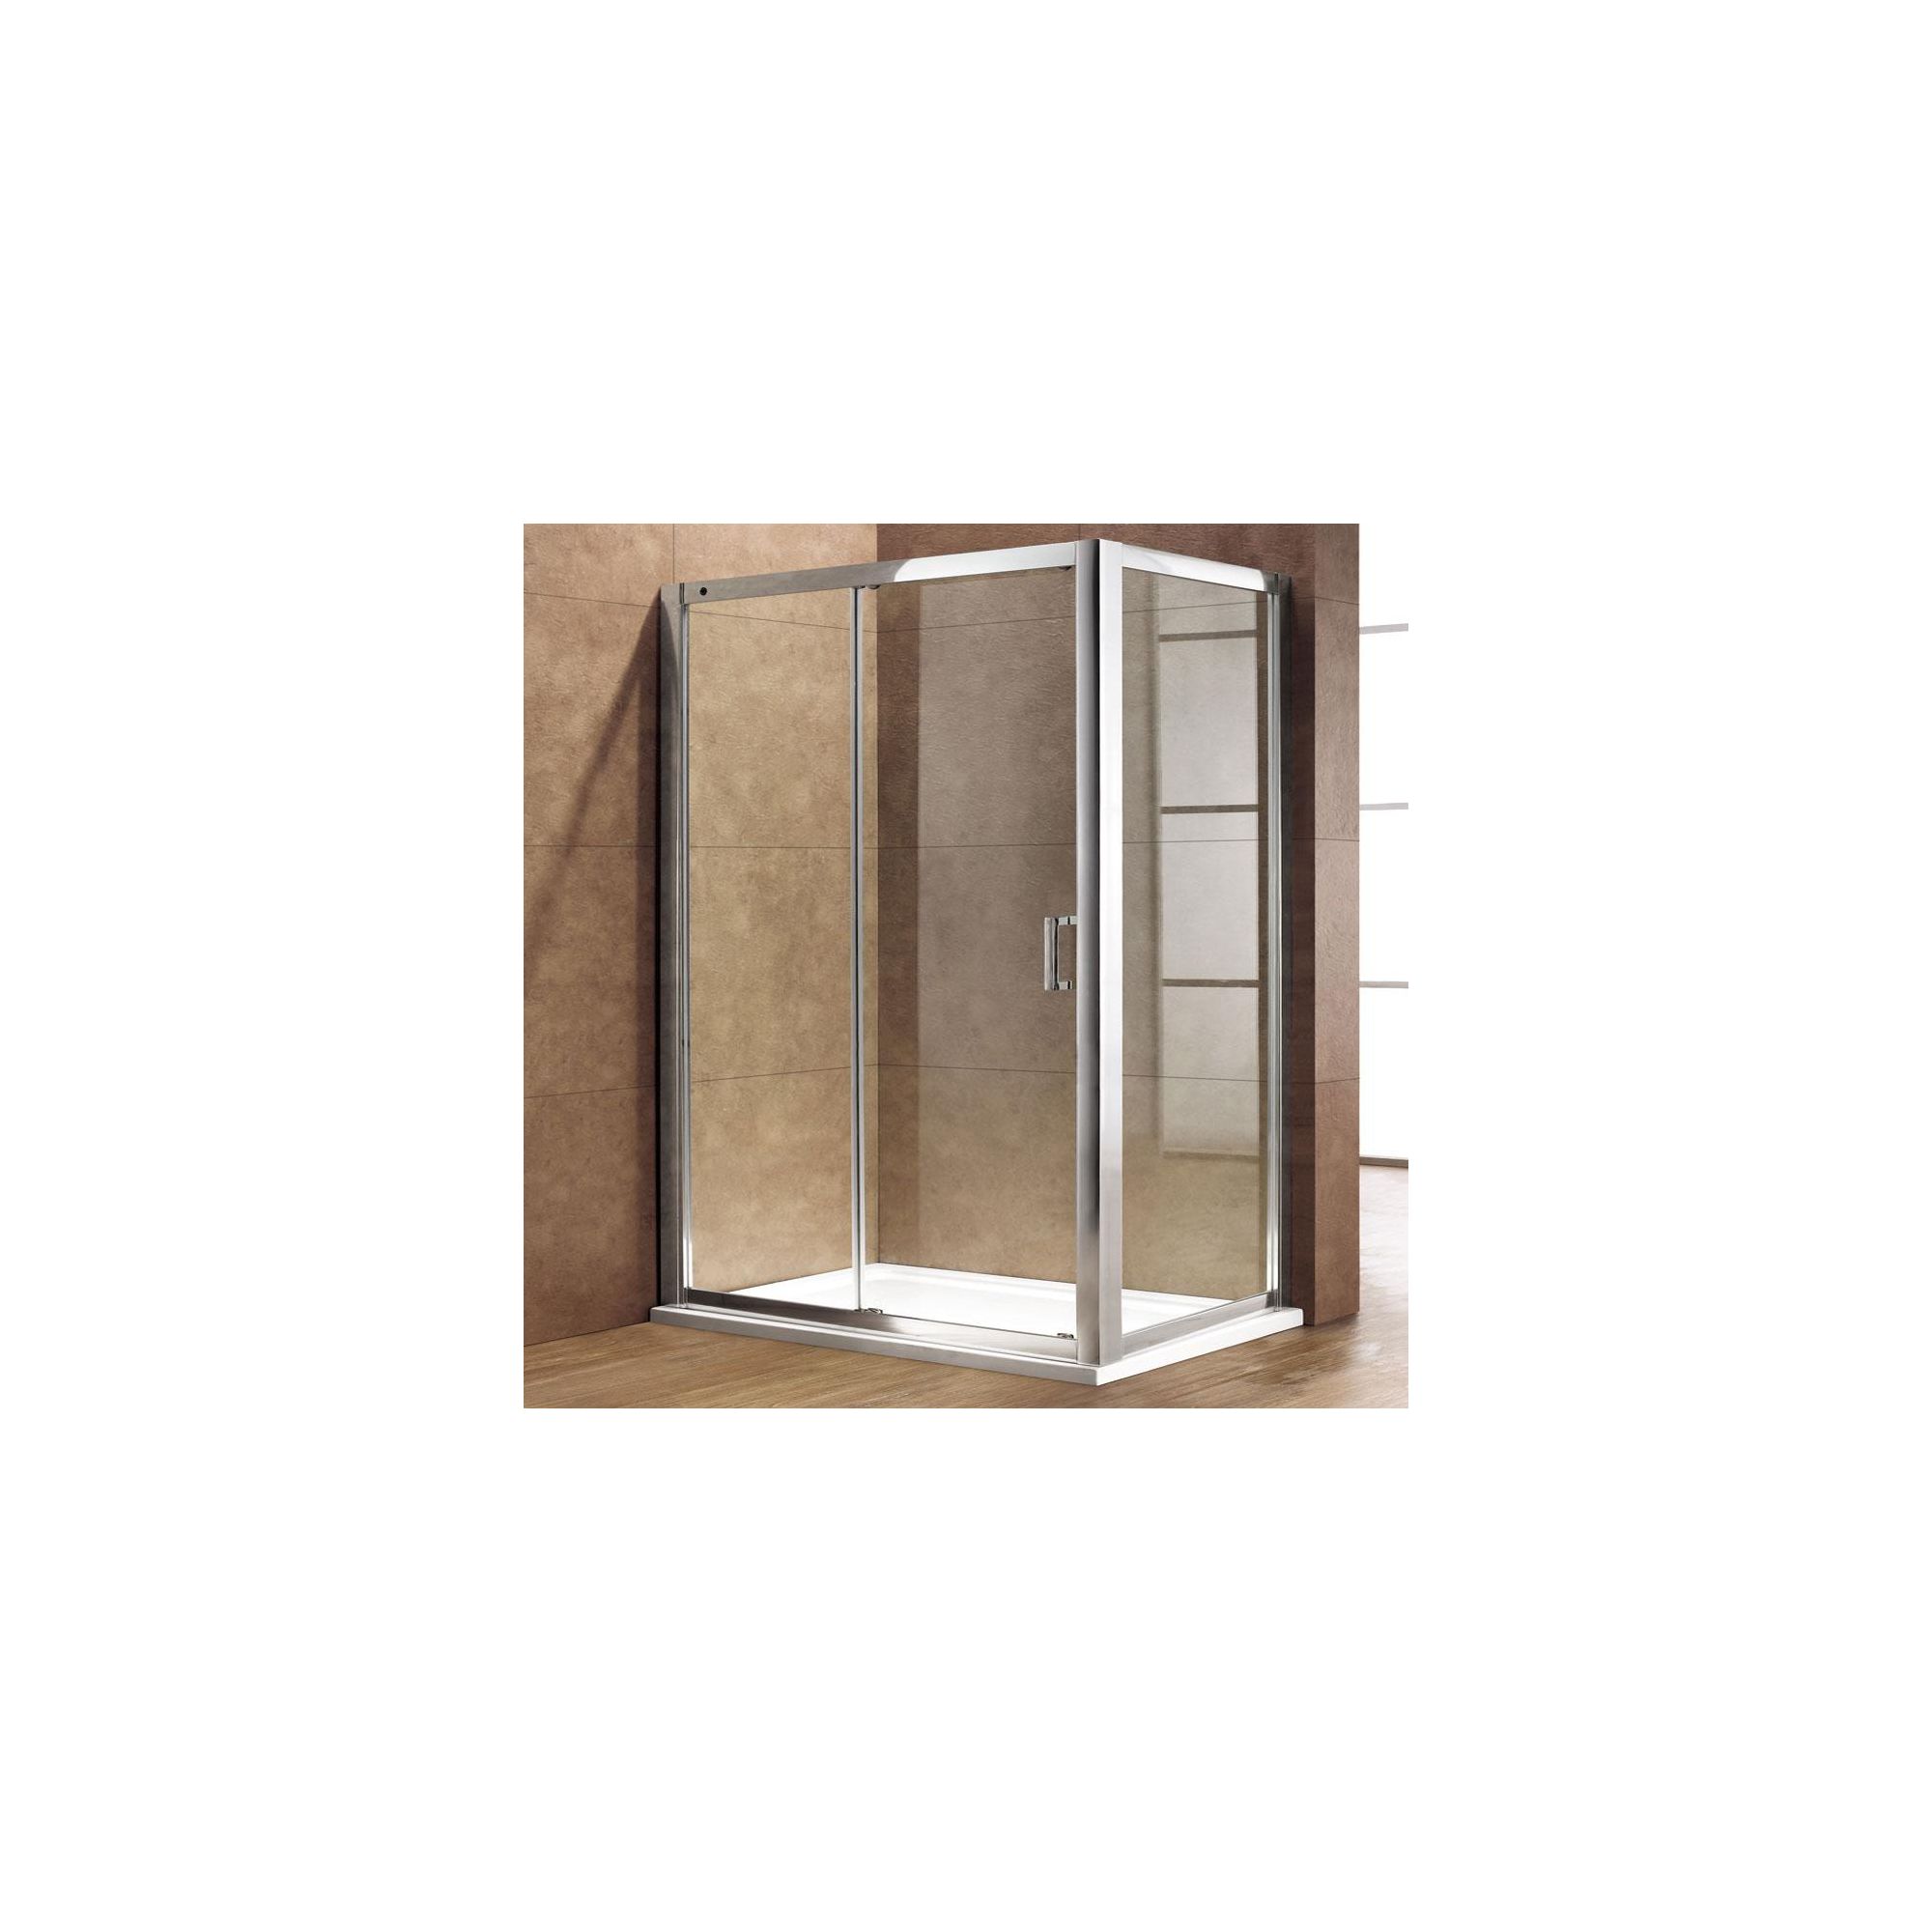 Duchy Premium Single Sliding Door Shower Enclosure, 1200mm x 800mm, 8mm Glass, Low Profile Tray at Tesco Direct